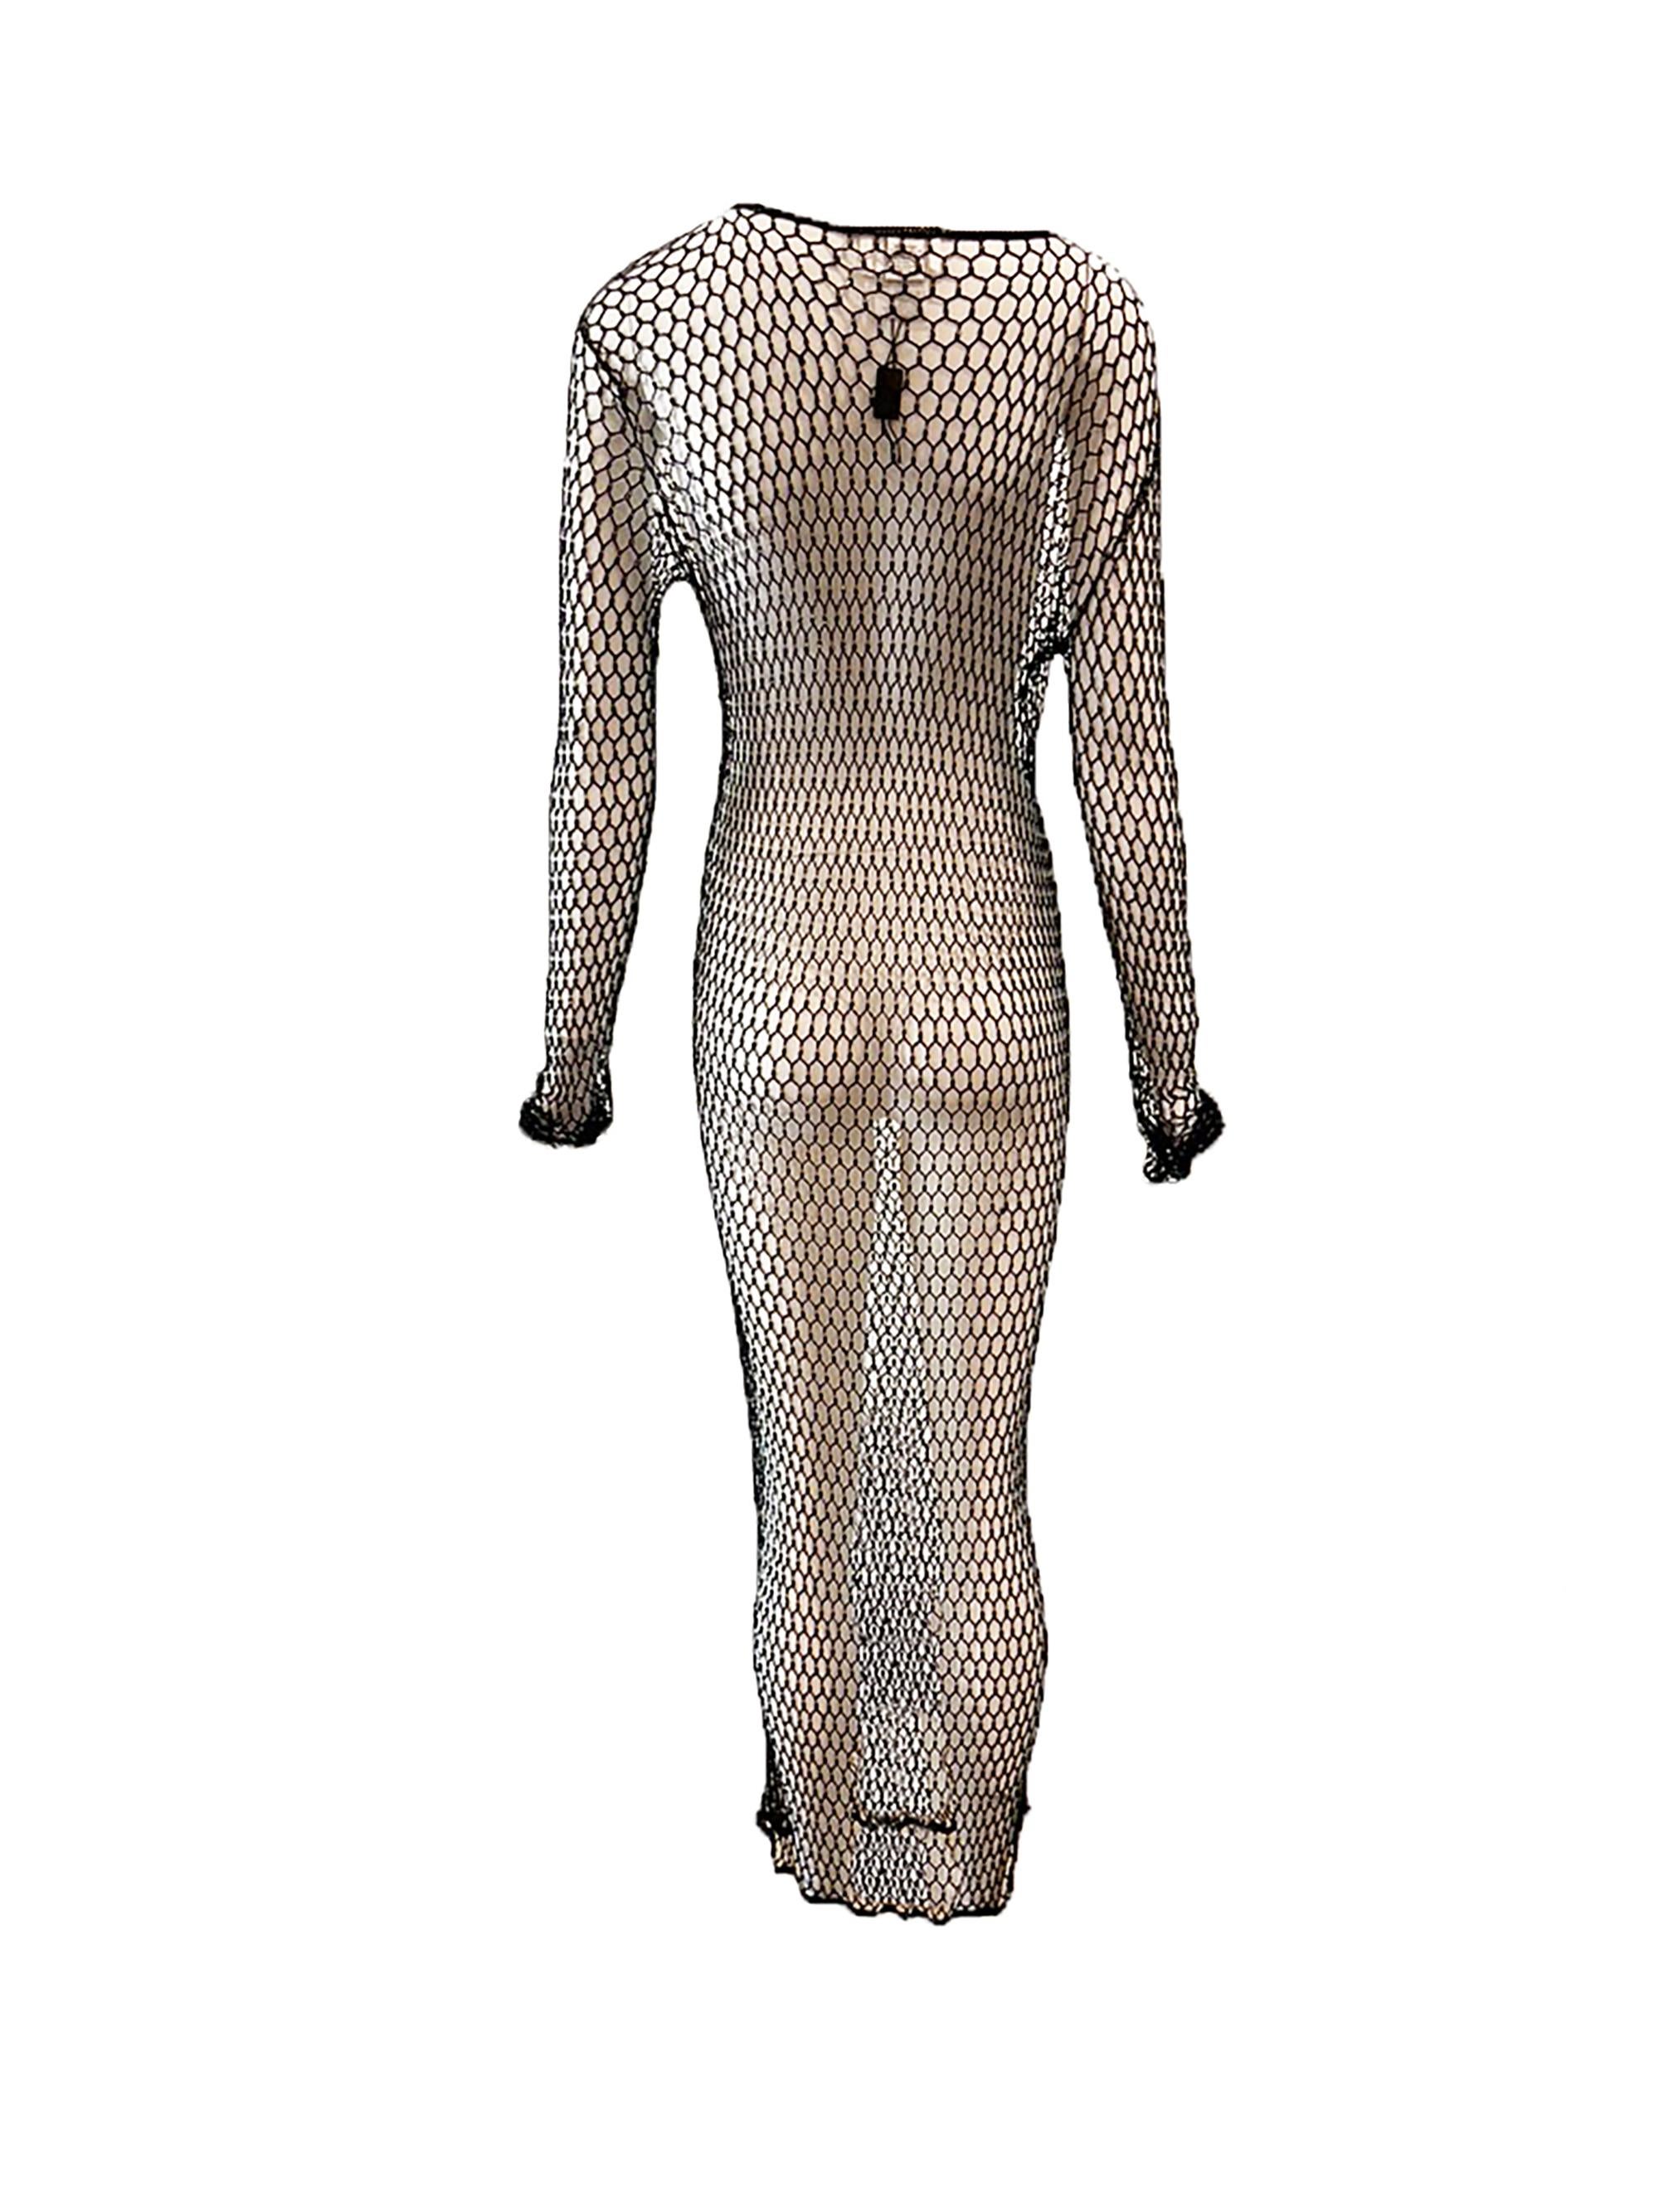 1990's D&G by Dolce & Gabbana Beaded Fishnet 20s Style gown 
Excellent Condition  
Rayon & Nylon fabric with glass beads
Made in Italy
SIZE: 44  / fits S- L 
Bust: 24